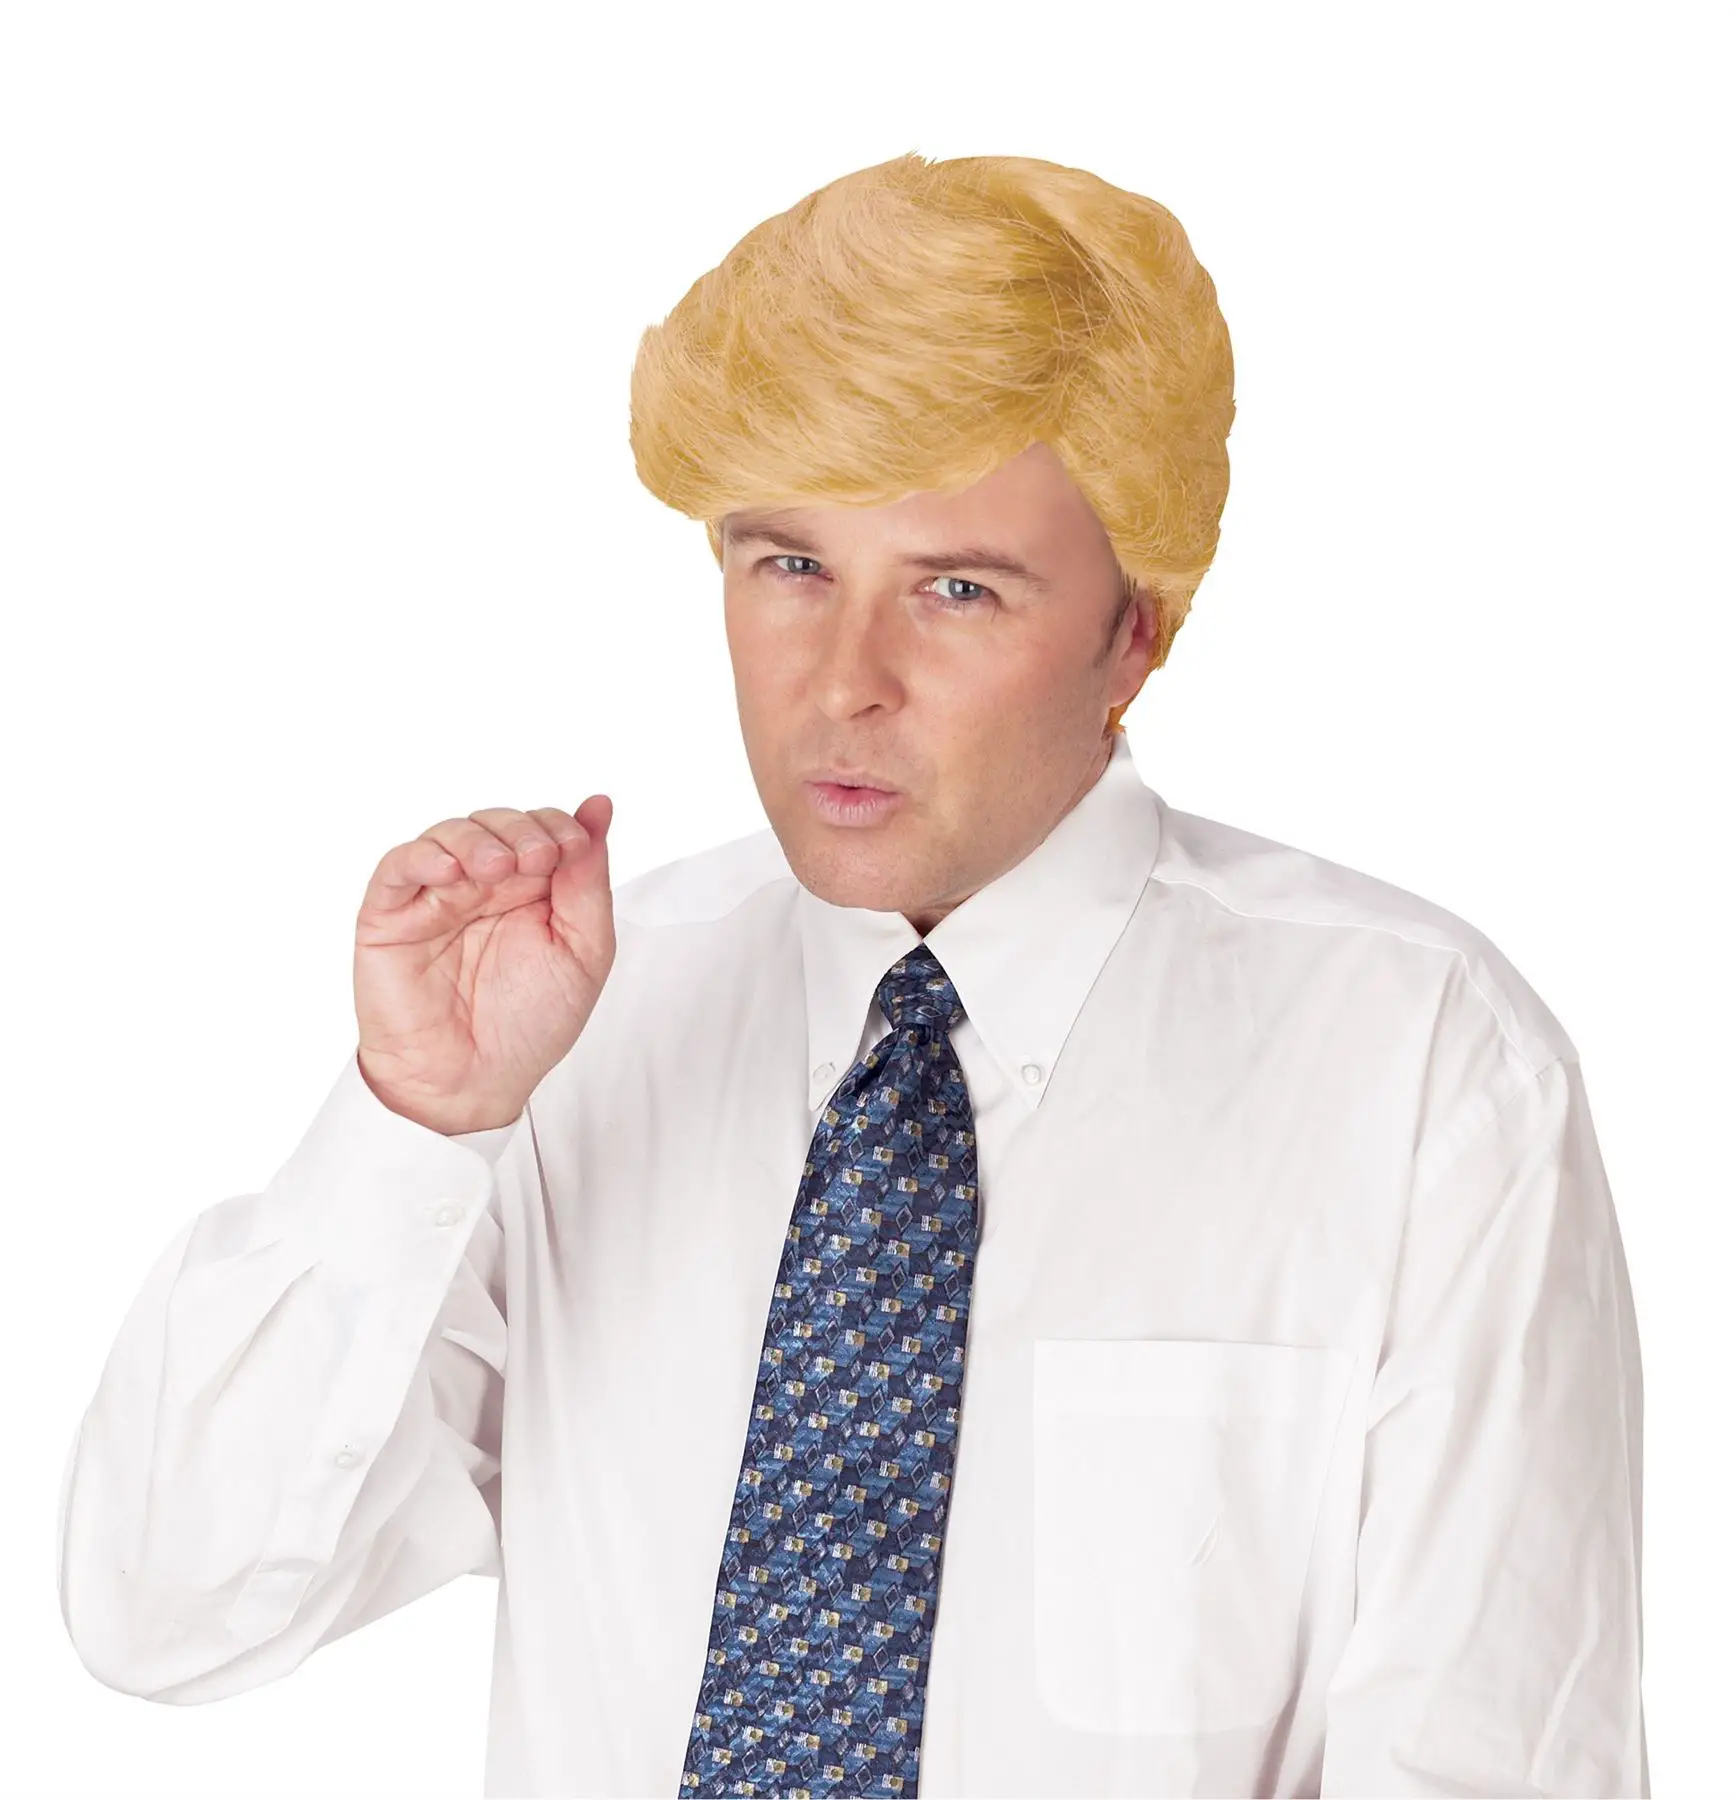 Mens President Donald Trump Comb Over Candidate Fancy Dress Wig